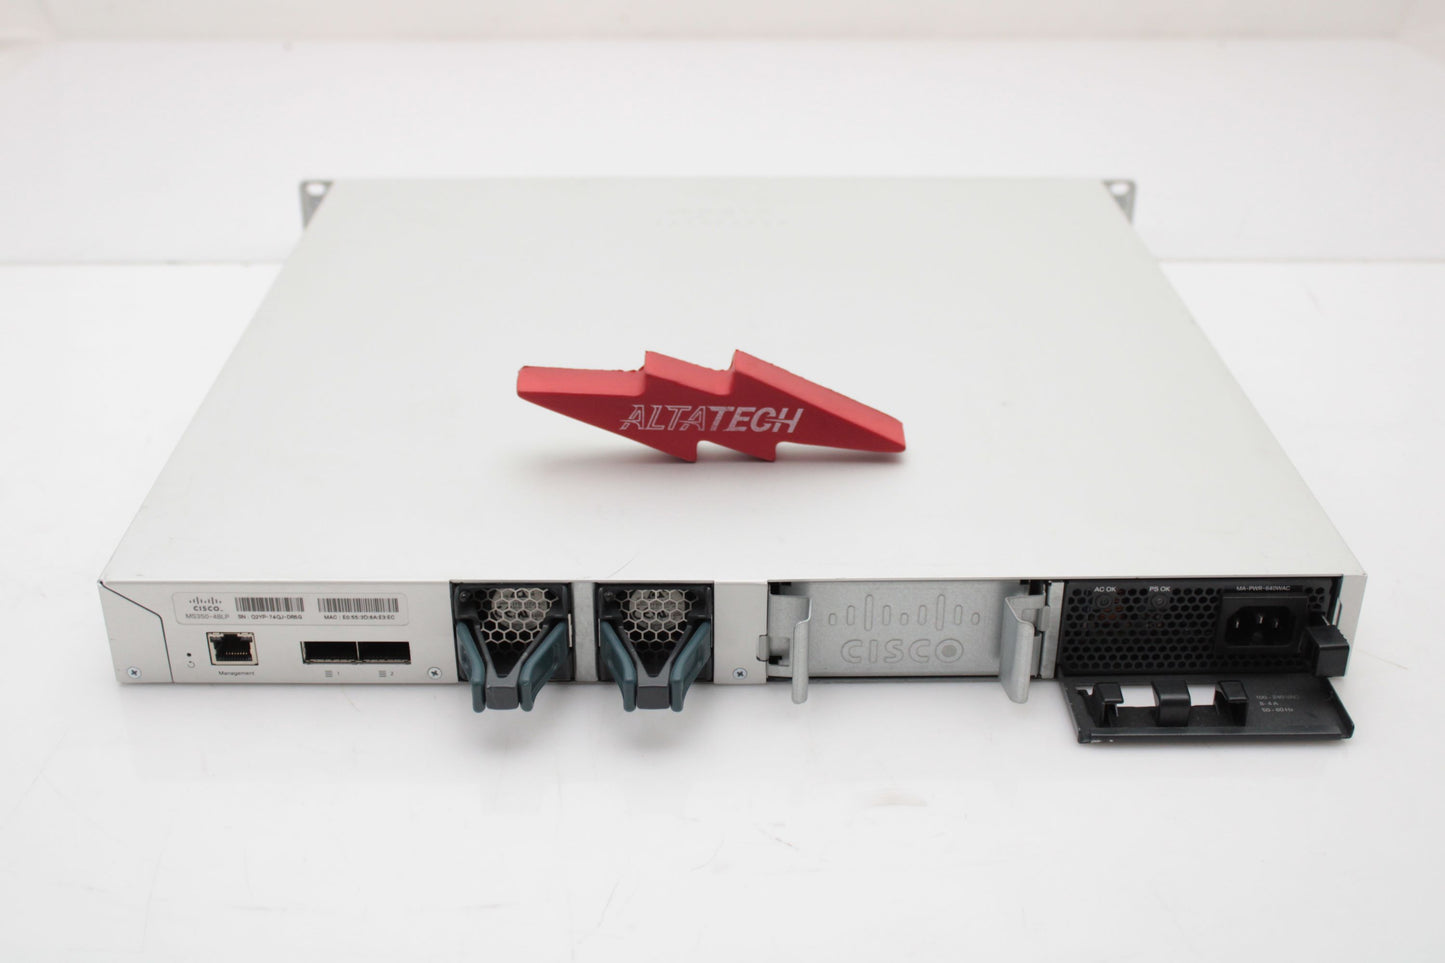 Cisco MS350-48LP-HW MS350-48LP-HW - MS350 Series Stackable Access Switches, Used